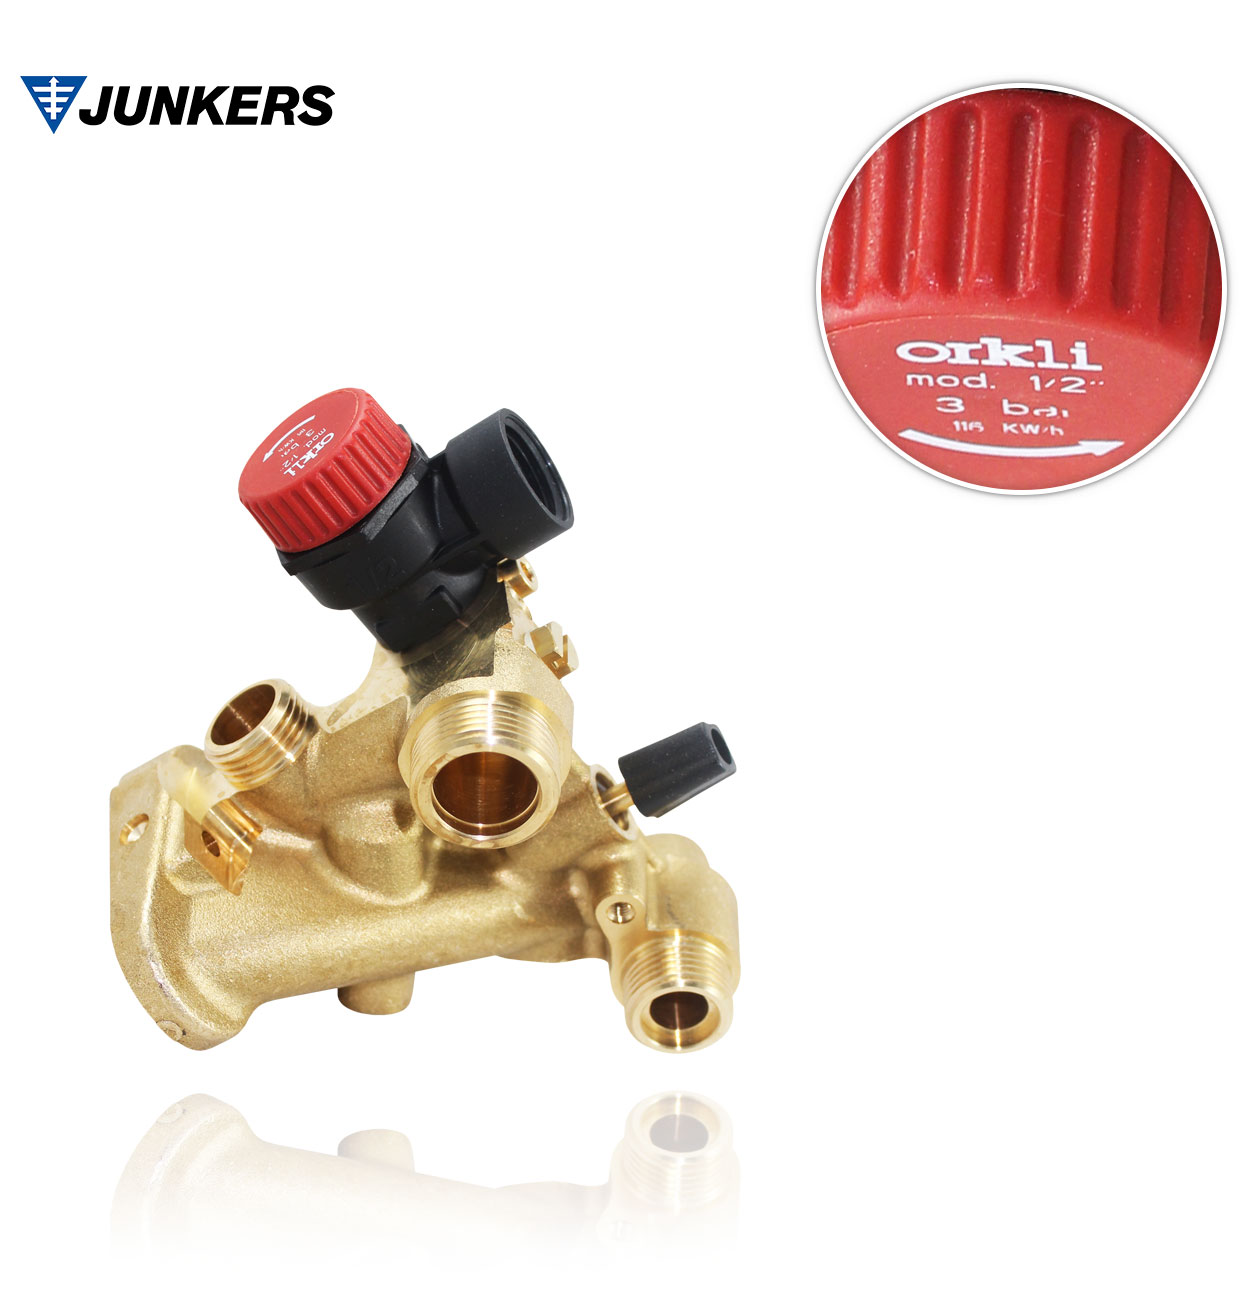 JUNKERS 8705700183 CONNECTION FLANGE